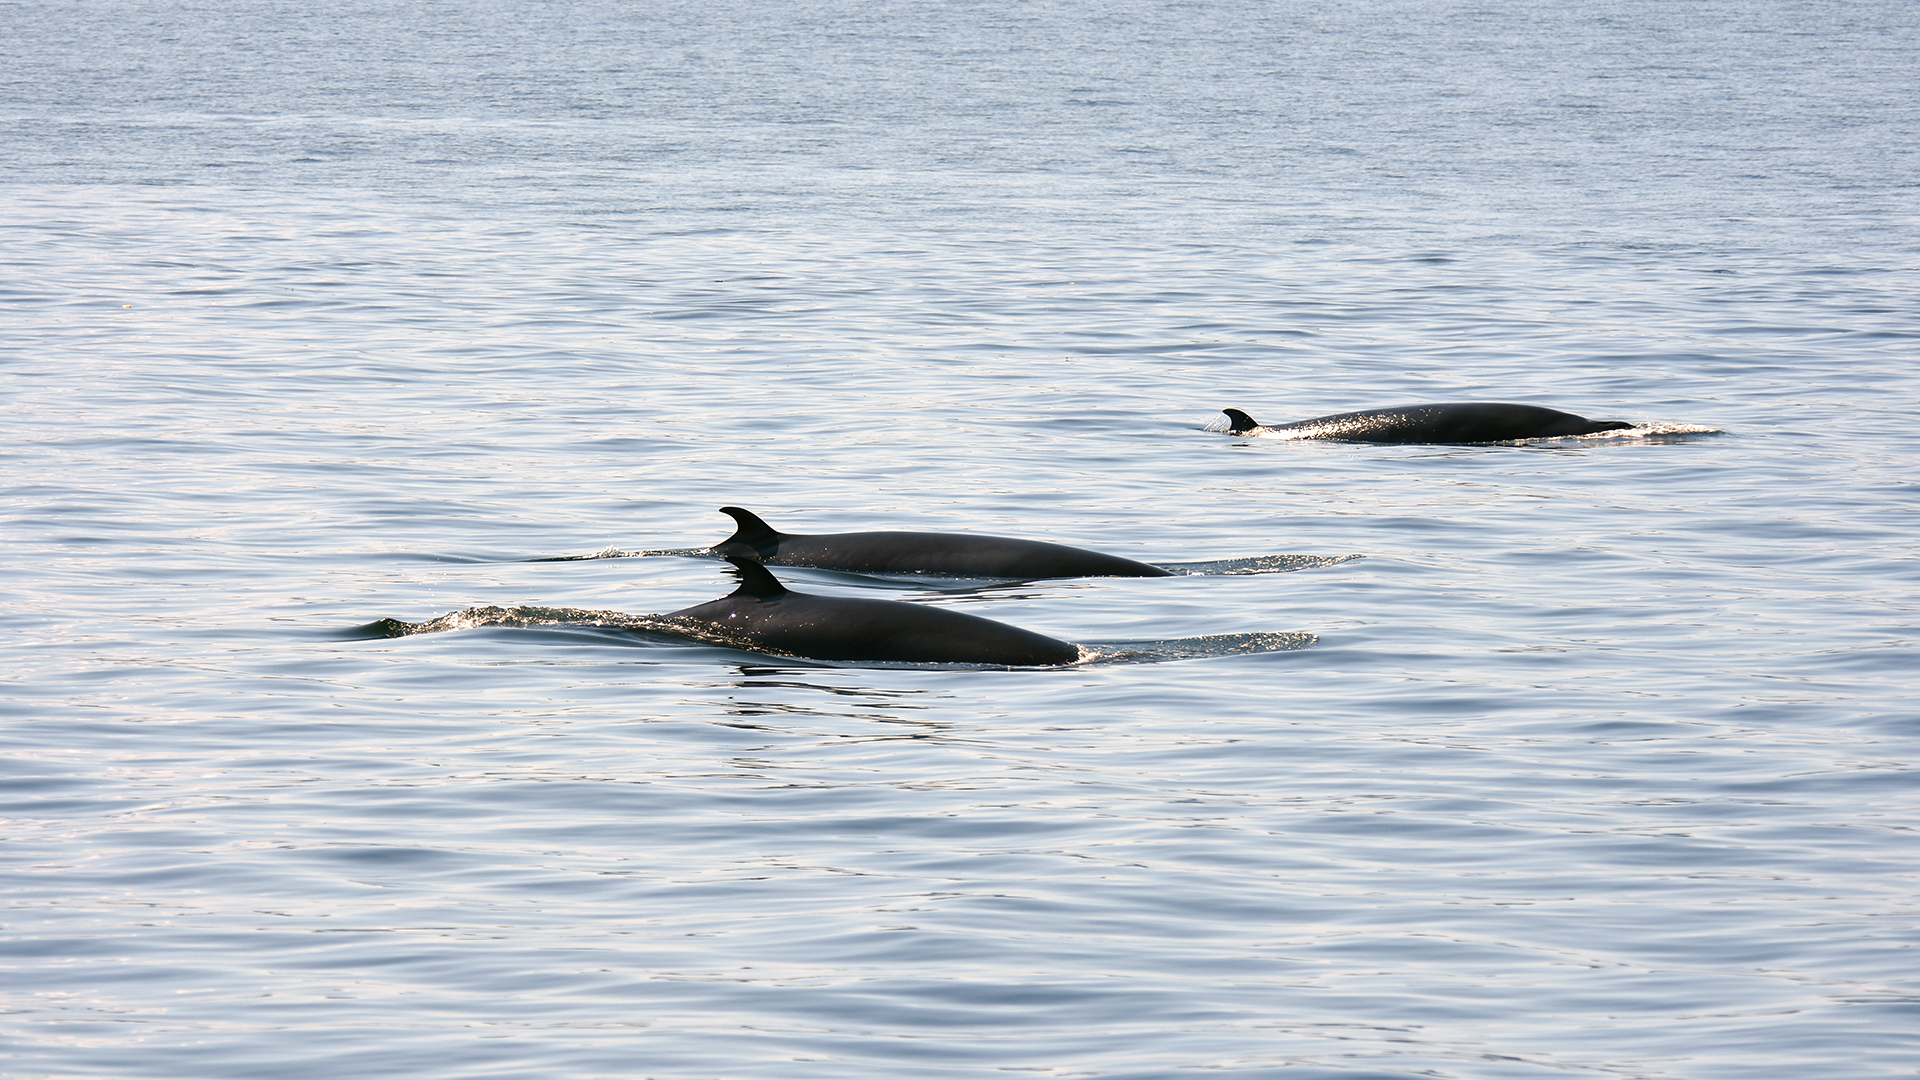 Three minke whales come to the surface to breathe.